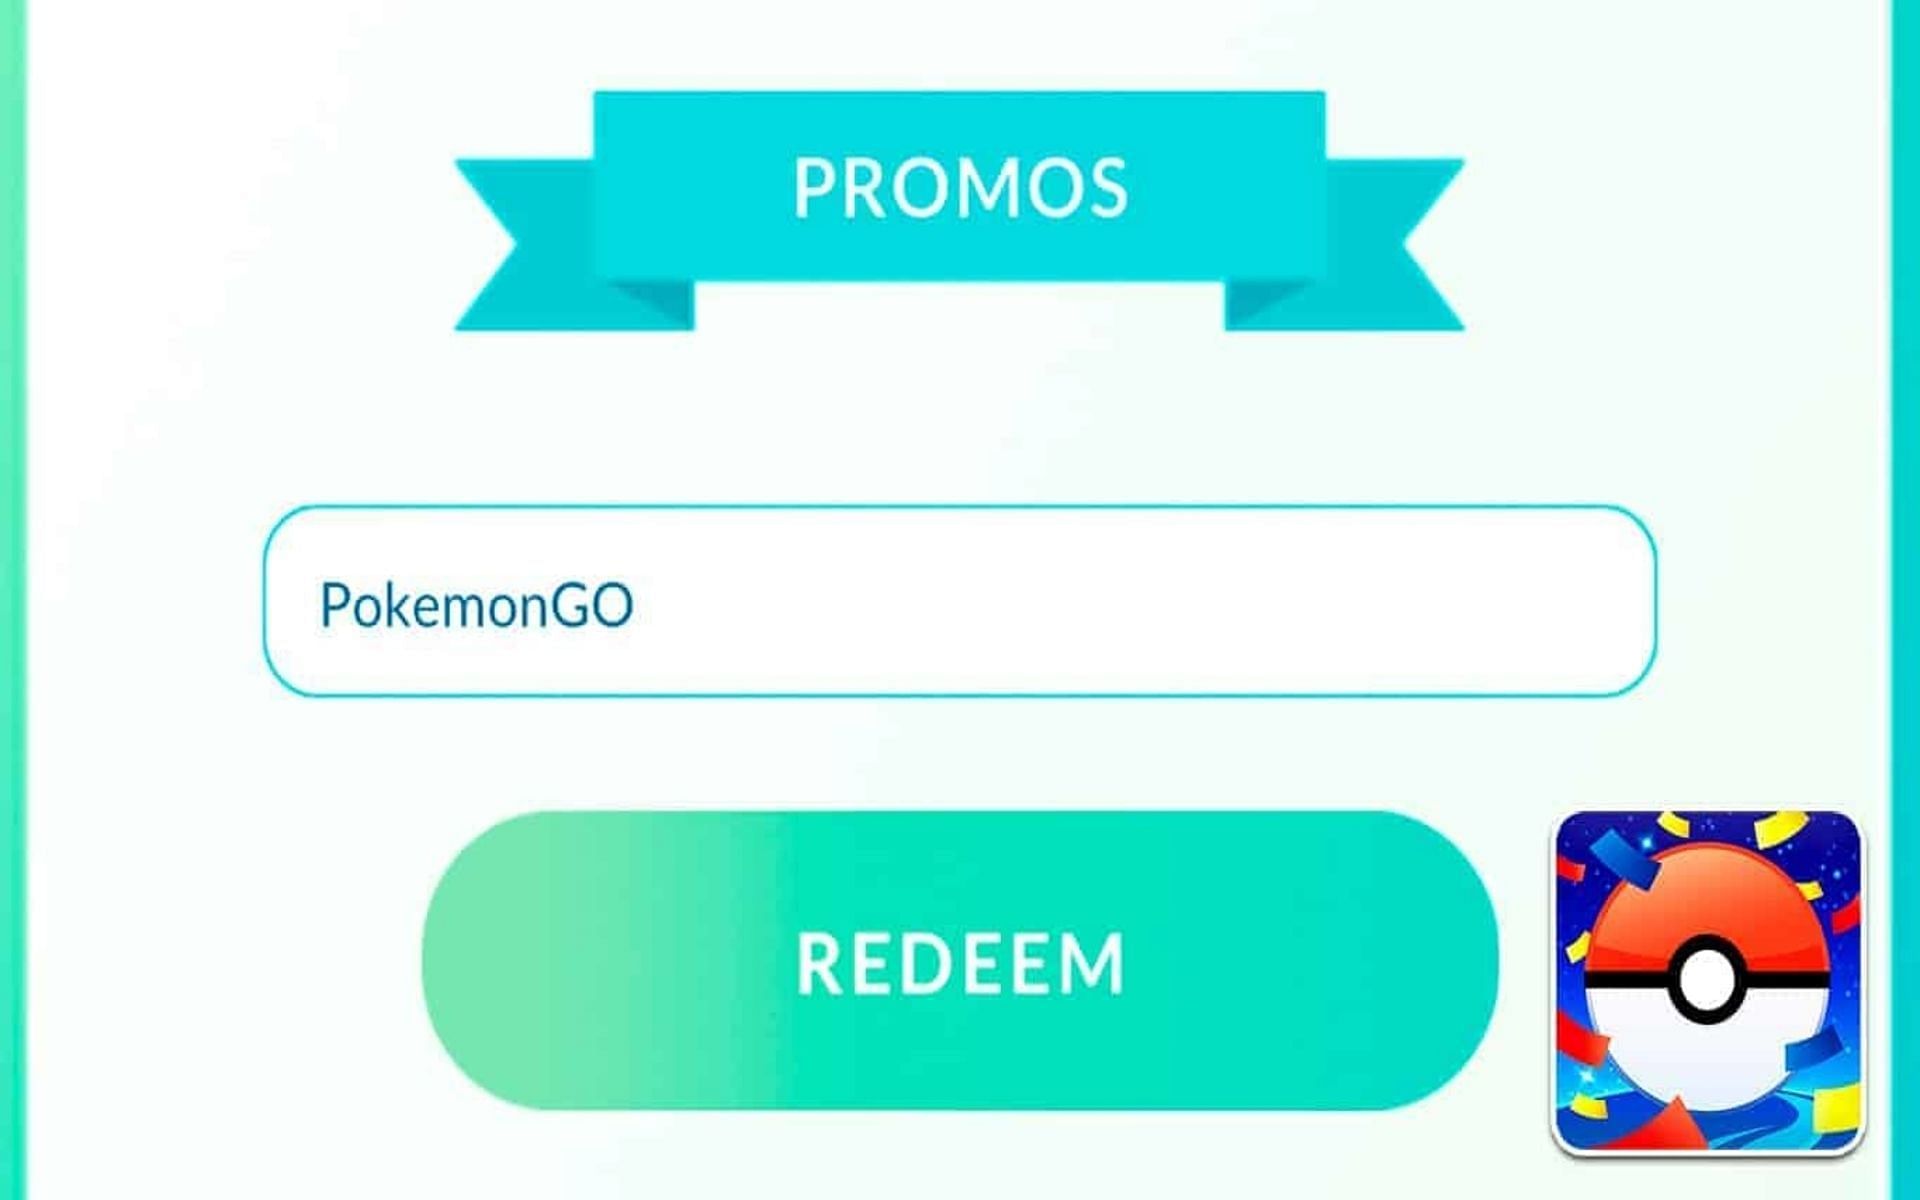 Android users can redeem codes in the shop (Image via Niantic)